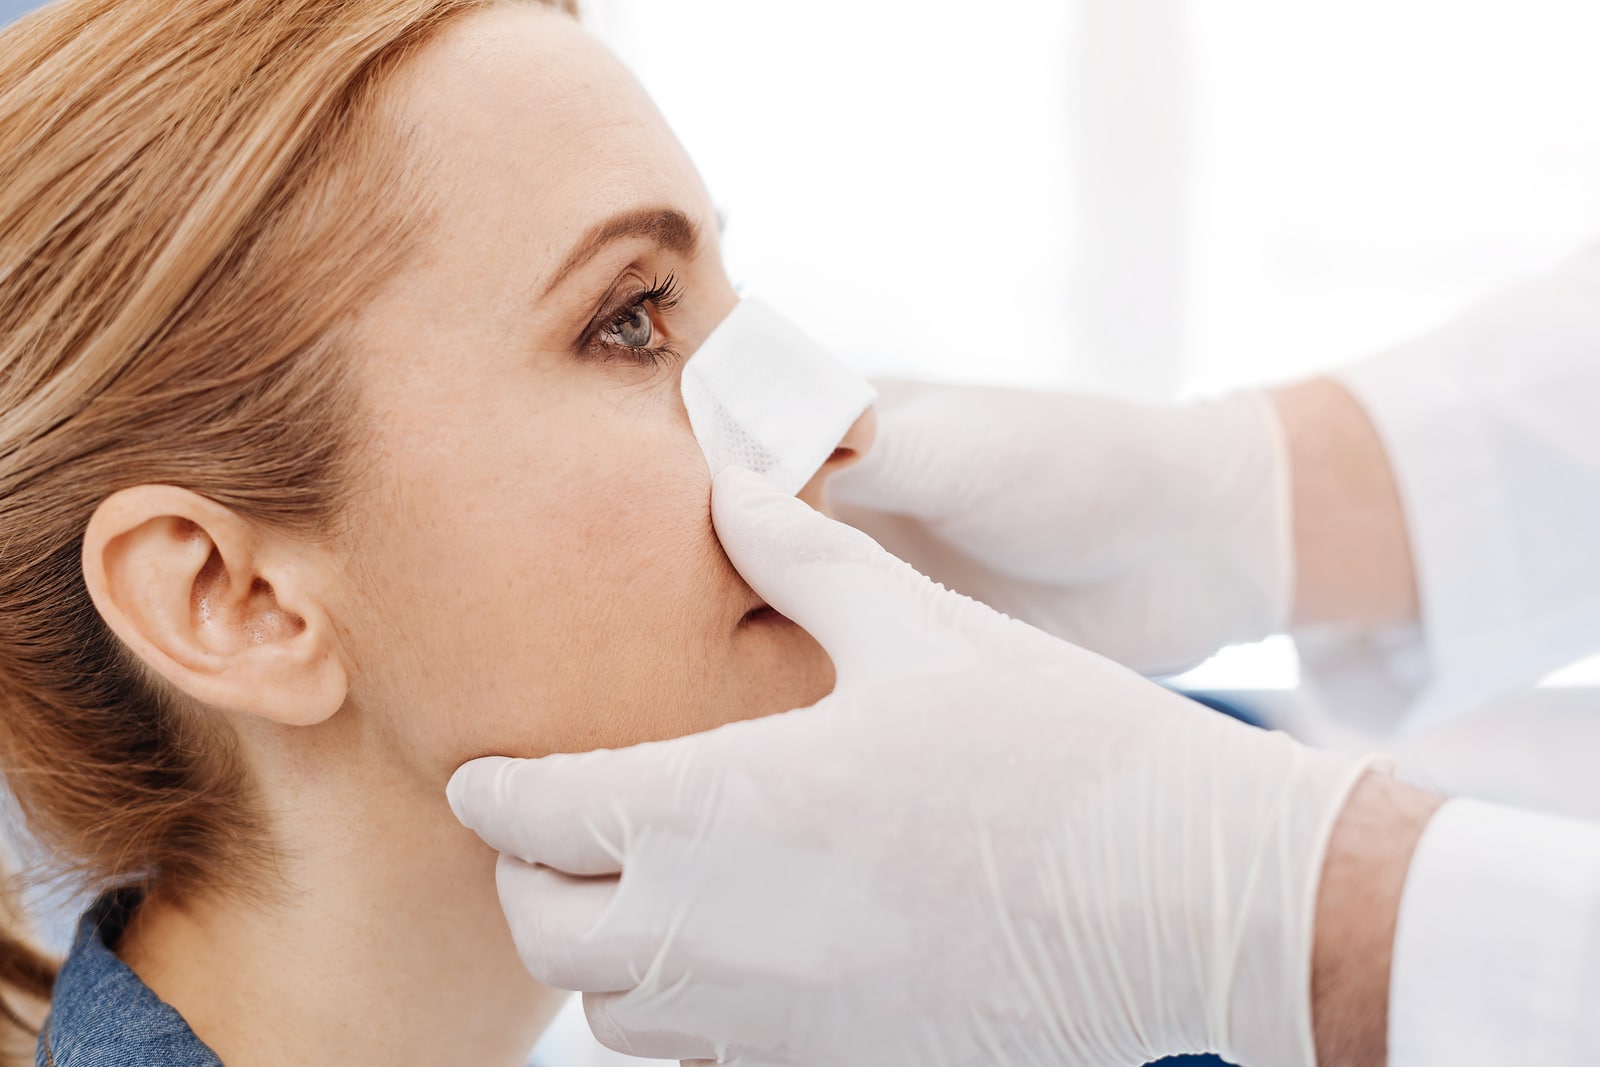 Caring for Your Nose After Nasal Reconstruction Surgery